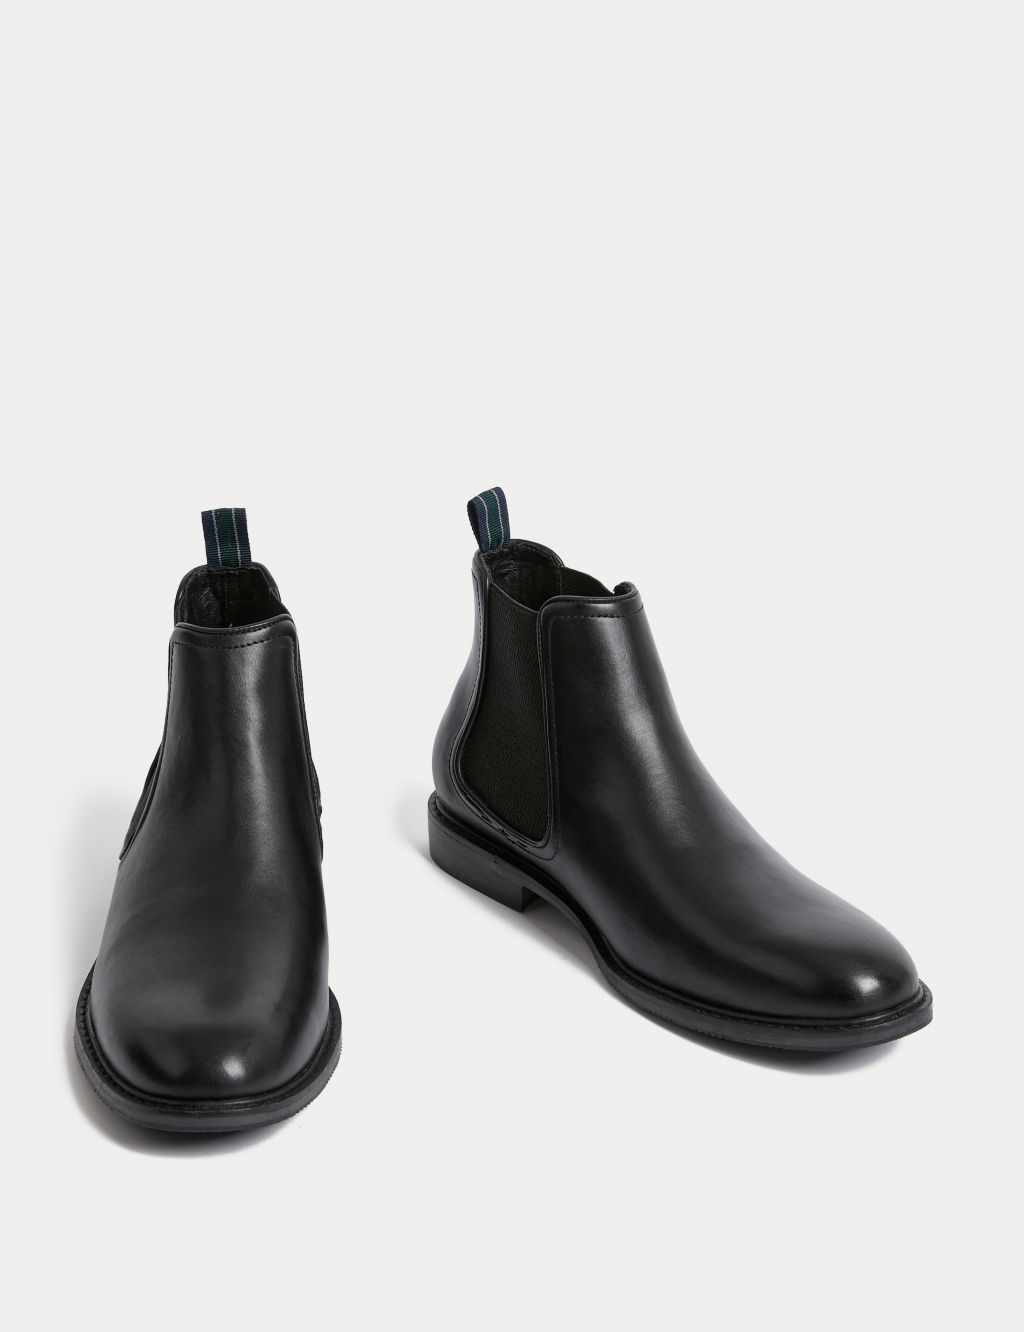 Pull-On Chelsea Boots image 2